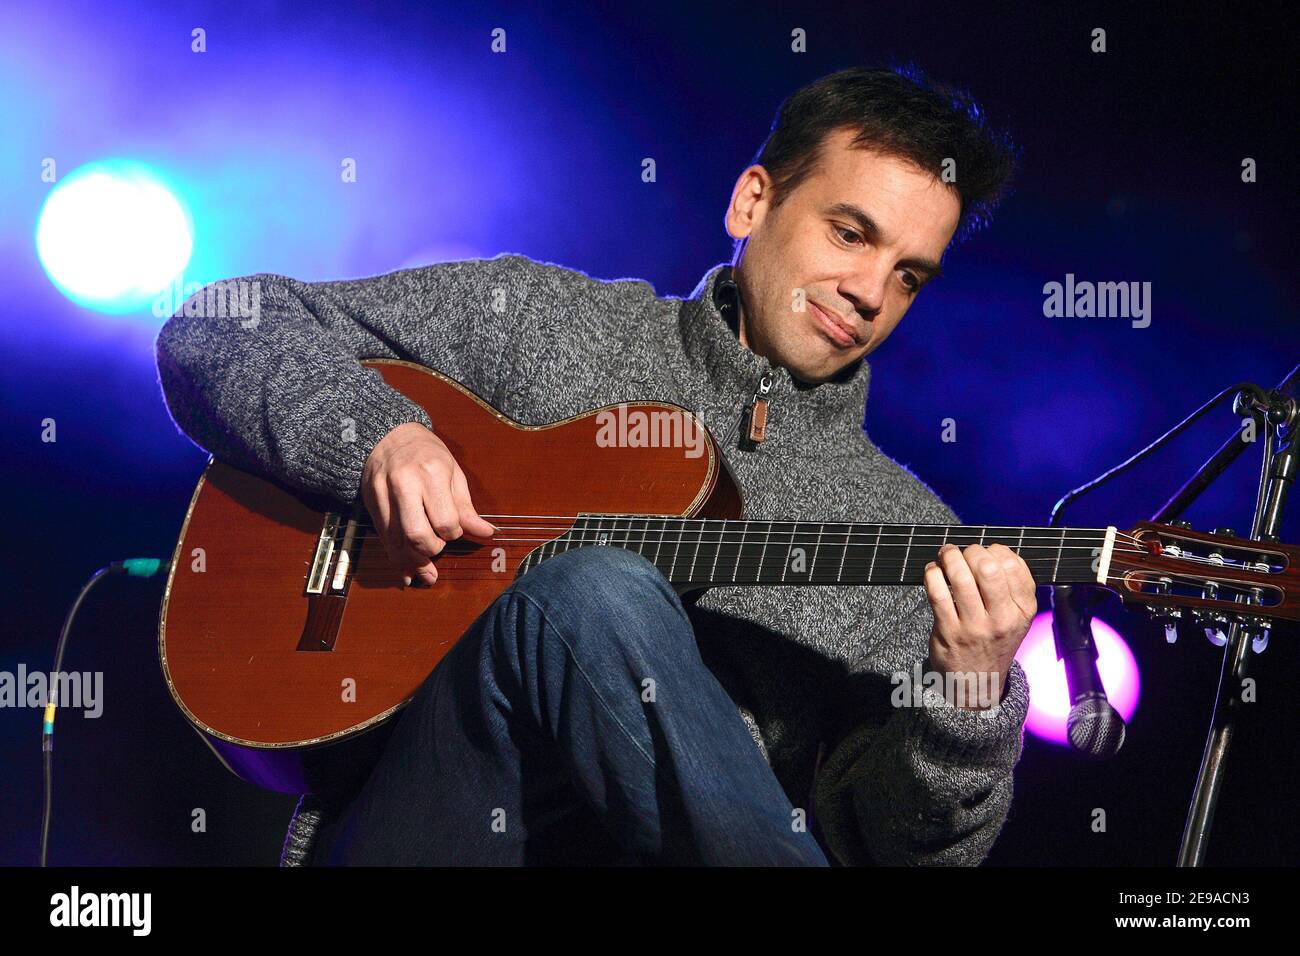 French guitarist Jean Felix Lalanne performs the live concert 'Around the guitar' held at the 'Hotel de Ville' in Paris, France, on May 20, 2006. 'U.E.J.F', 'Ni Putes Ni Soumises', 'SOS-RACISME', 'Coordination des Berberes de France', 'Amities Judeo-Chretiennes', 'Amitie Judeo-Noire' associations want to organize each year a 'Spring for Human Rights' in France. Photo by Edouard Bernaux/ABACAPRESS.COM Stock Photo